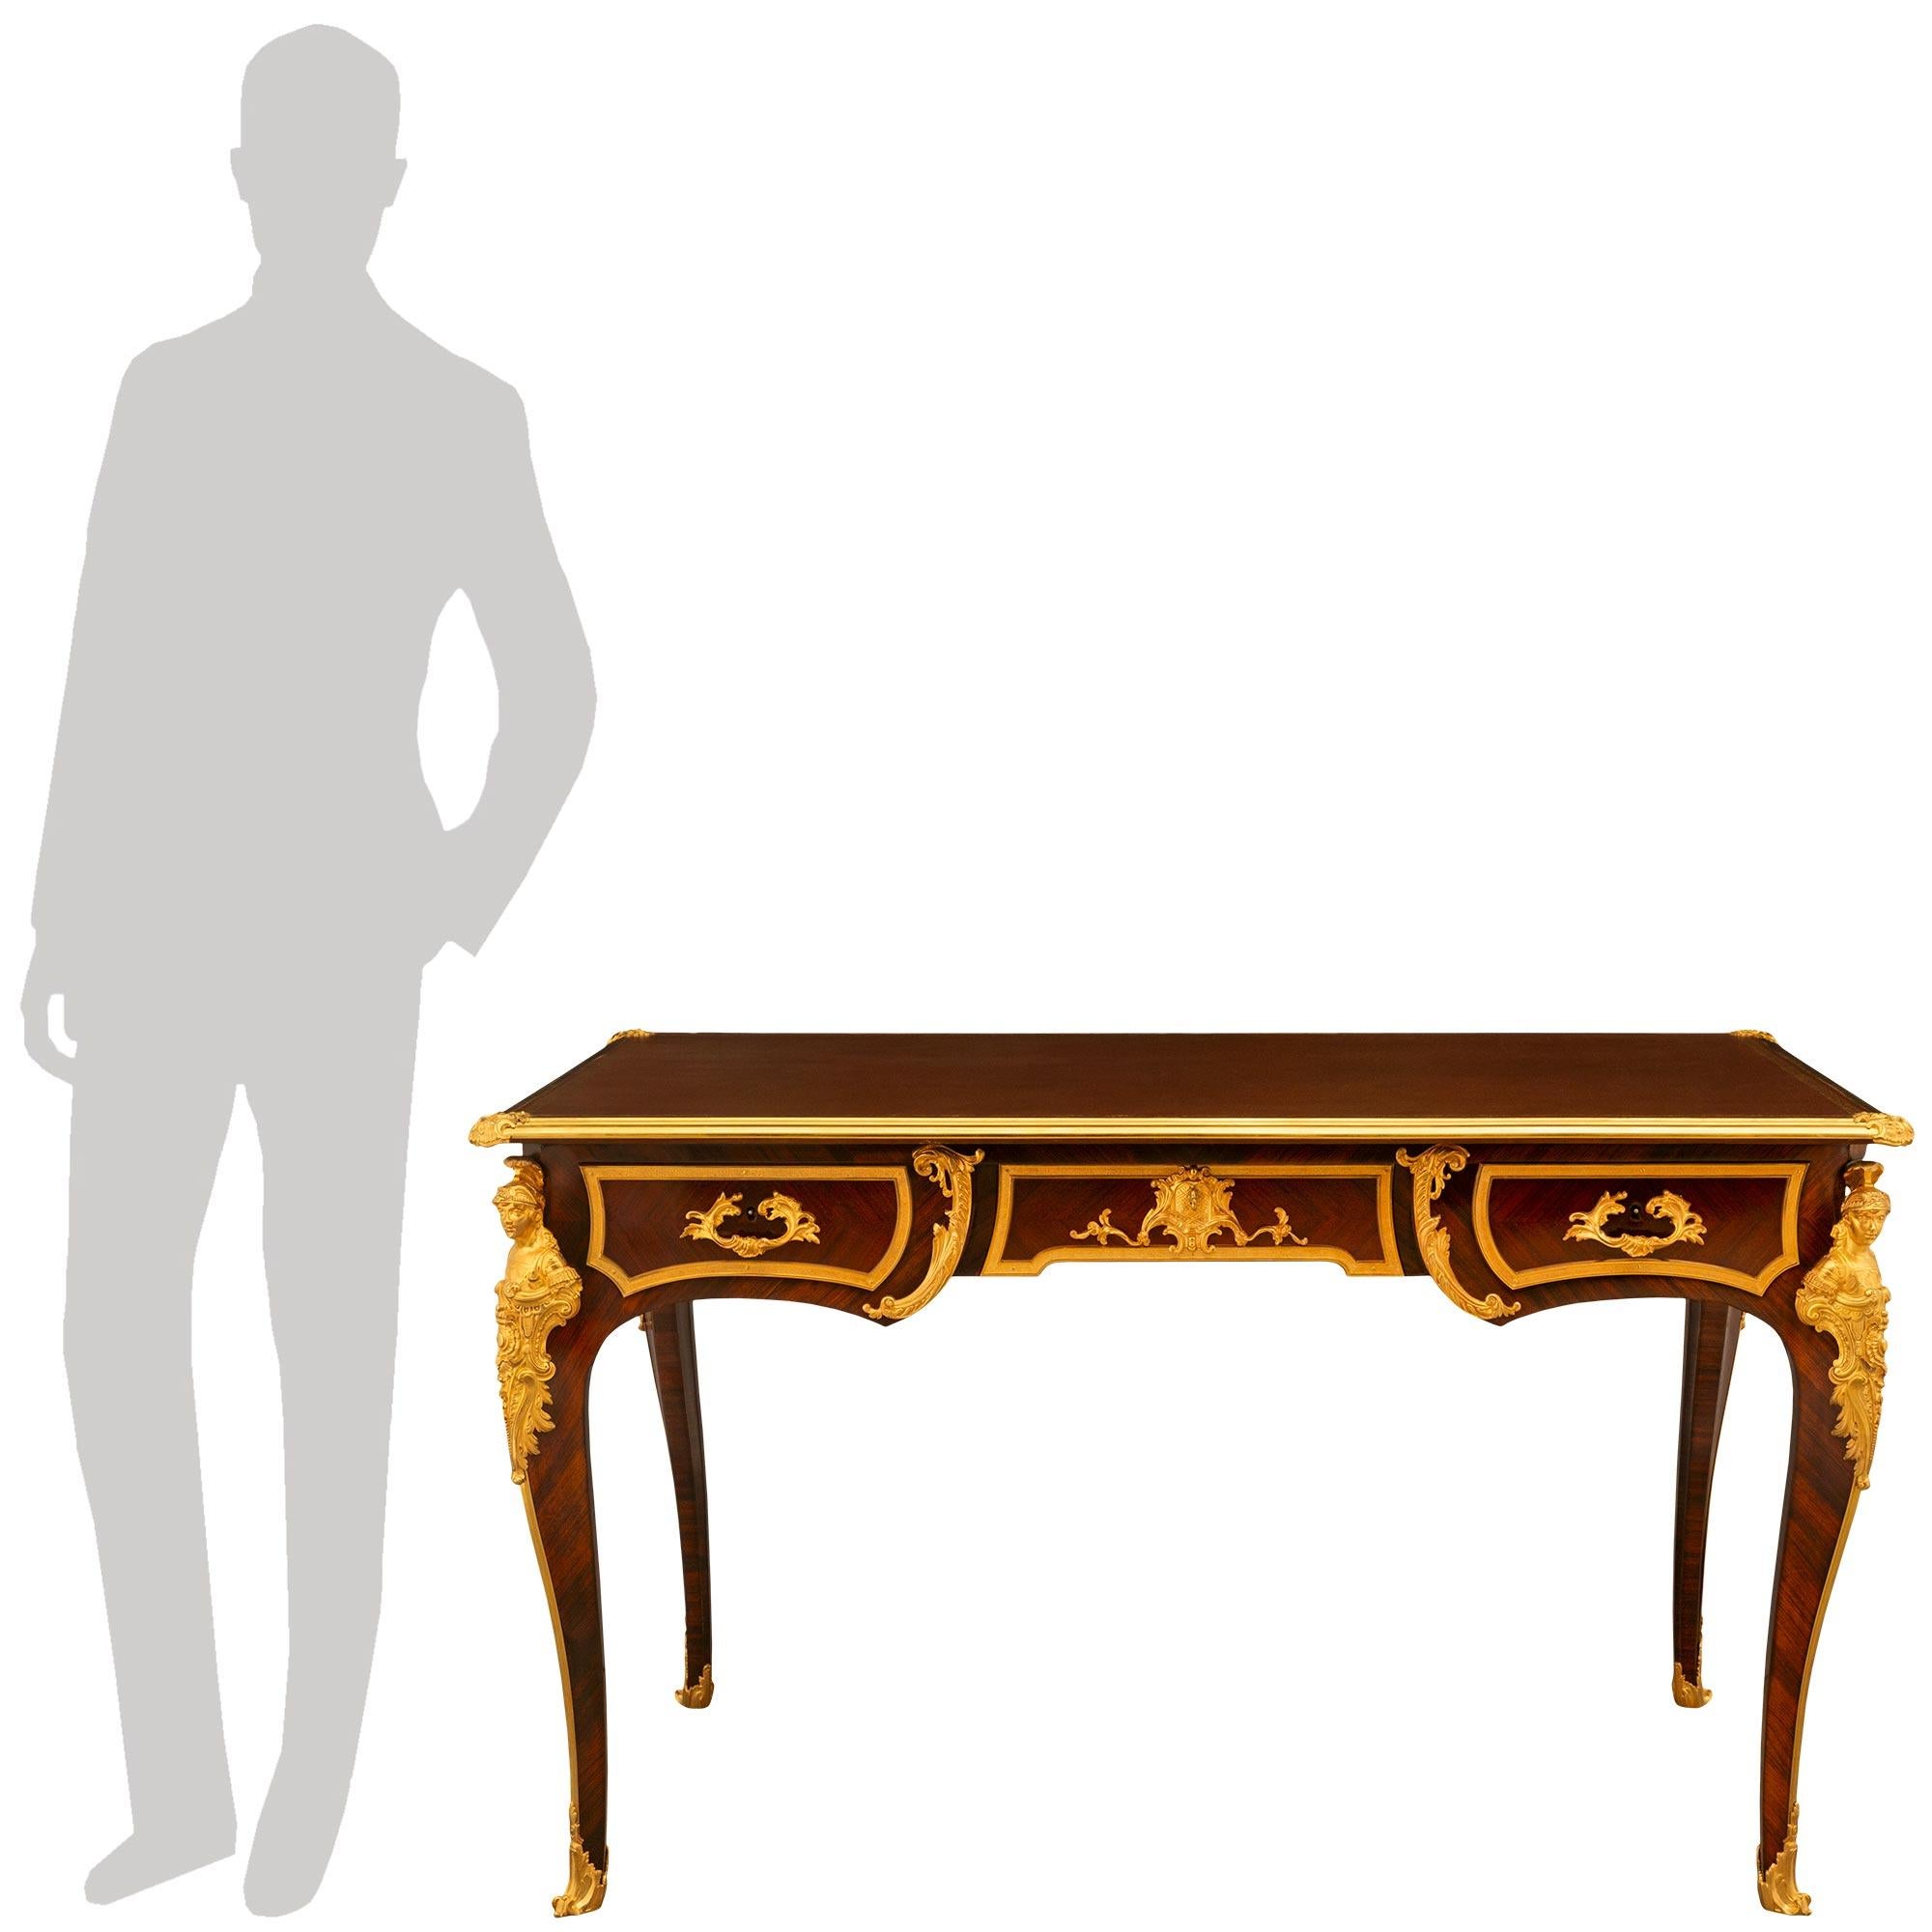 A stunning and high quality French 19th century Louis XV st. Kingwood and Ormolu Bureau Plat. The desk is raised by elegant cabriole legs with rich wrap around ormolu sabots. Ormolu chutes connect the richly chased corner ormolu mounts of soldiers